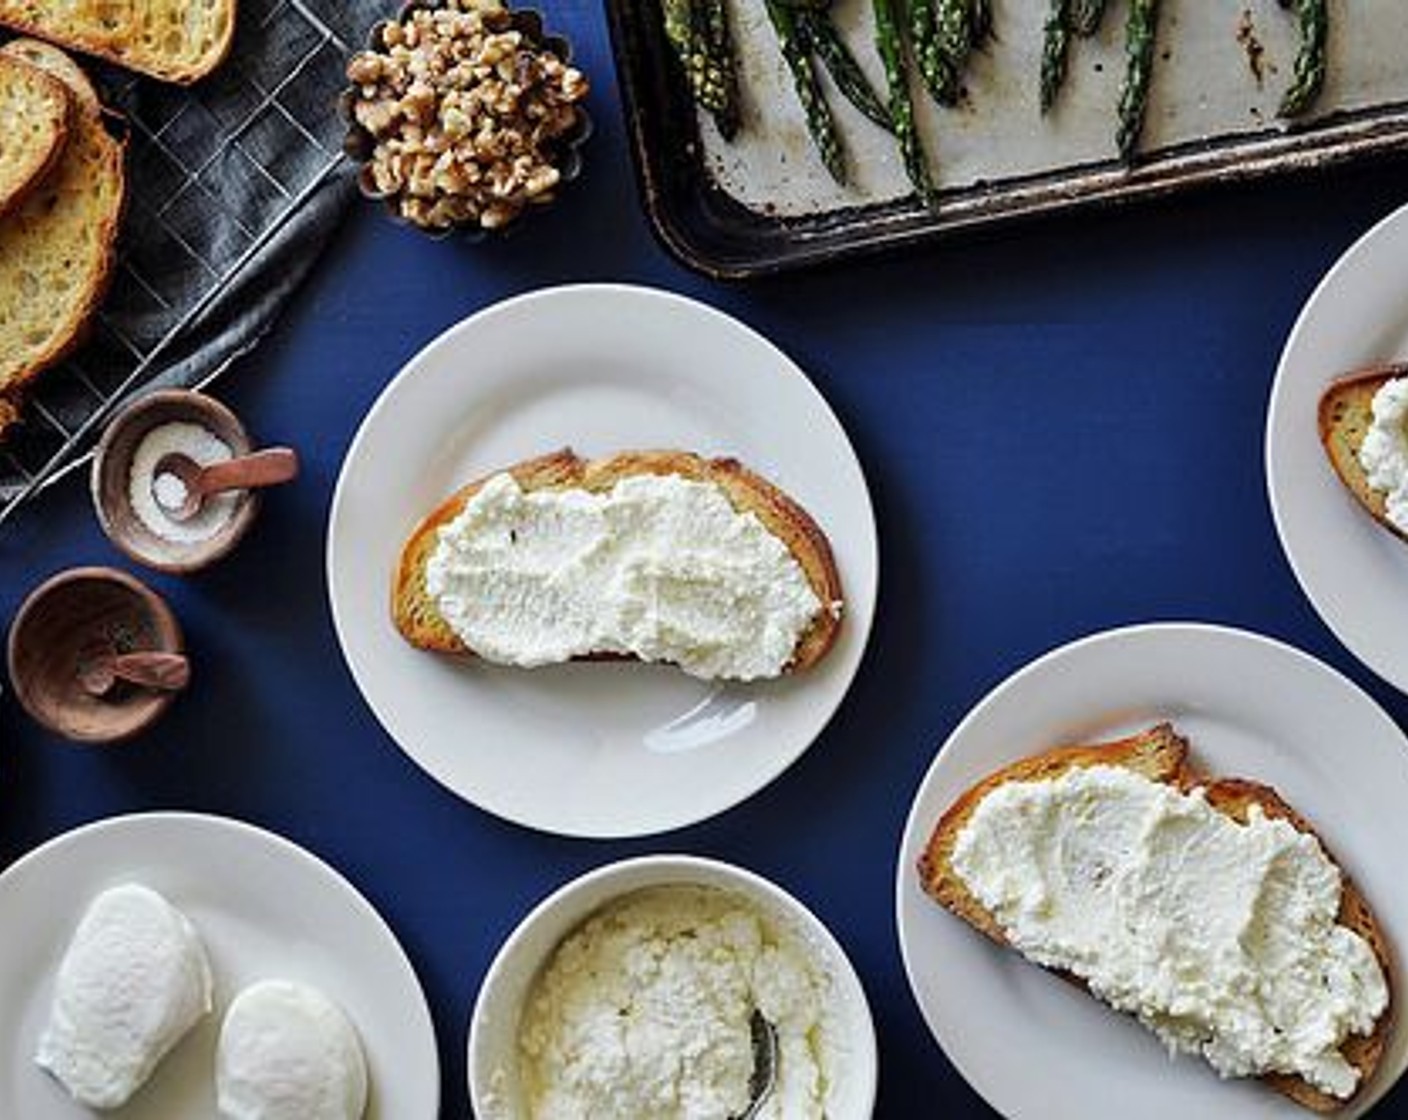 step 12 To assemble the sandwiches, spread some ricotta on each slice of toasted bread.